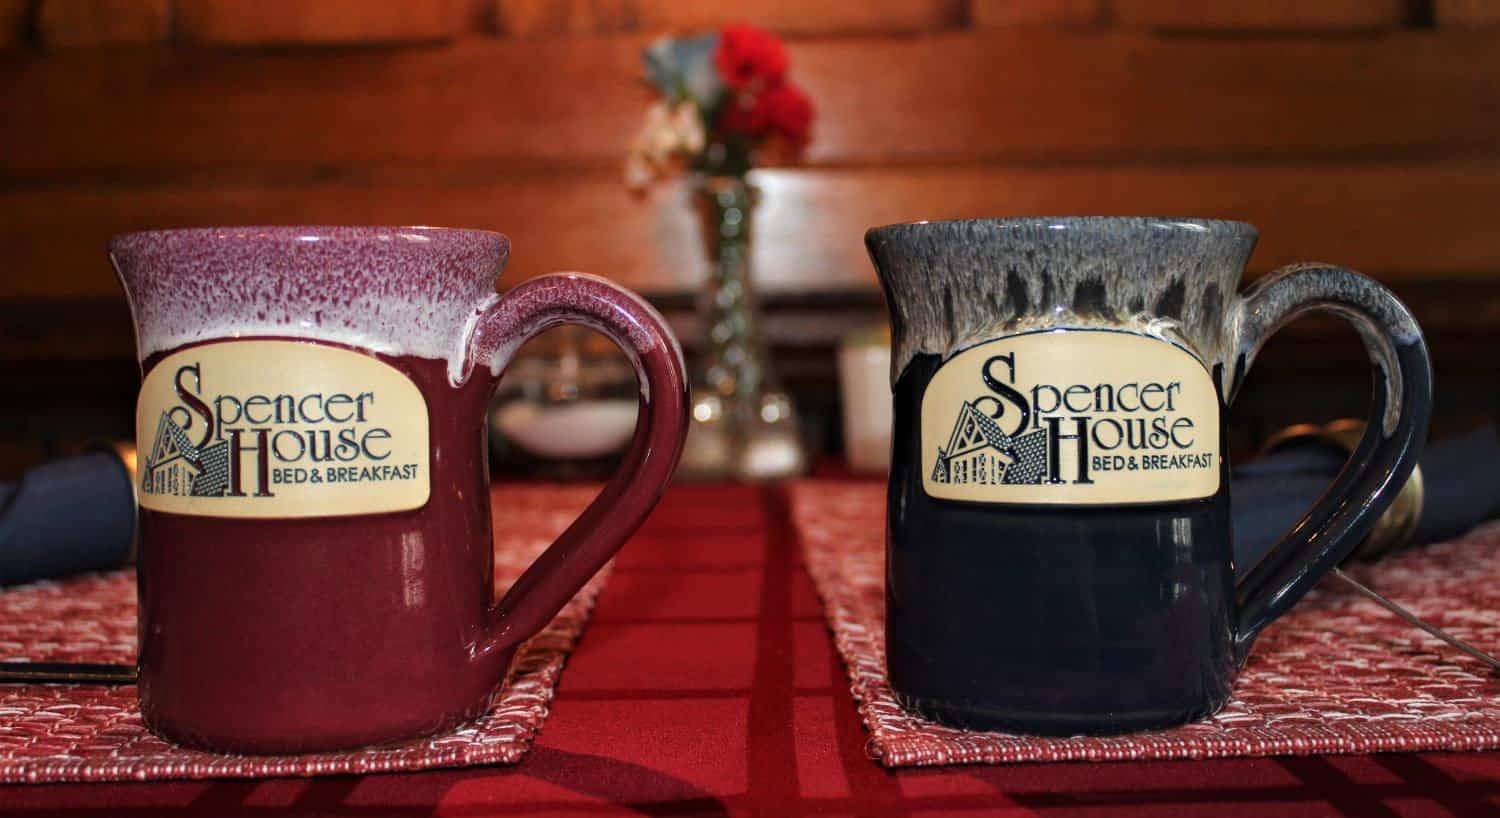 Close up view of red and navy stoneware cups with the Spencer House Bed & Breakfast logo